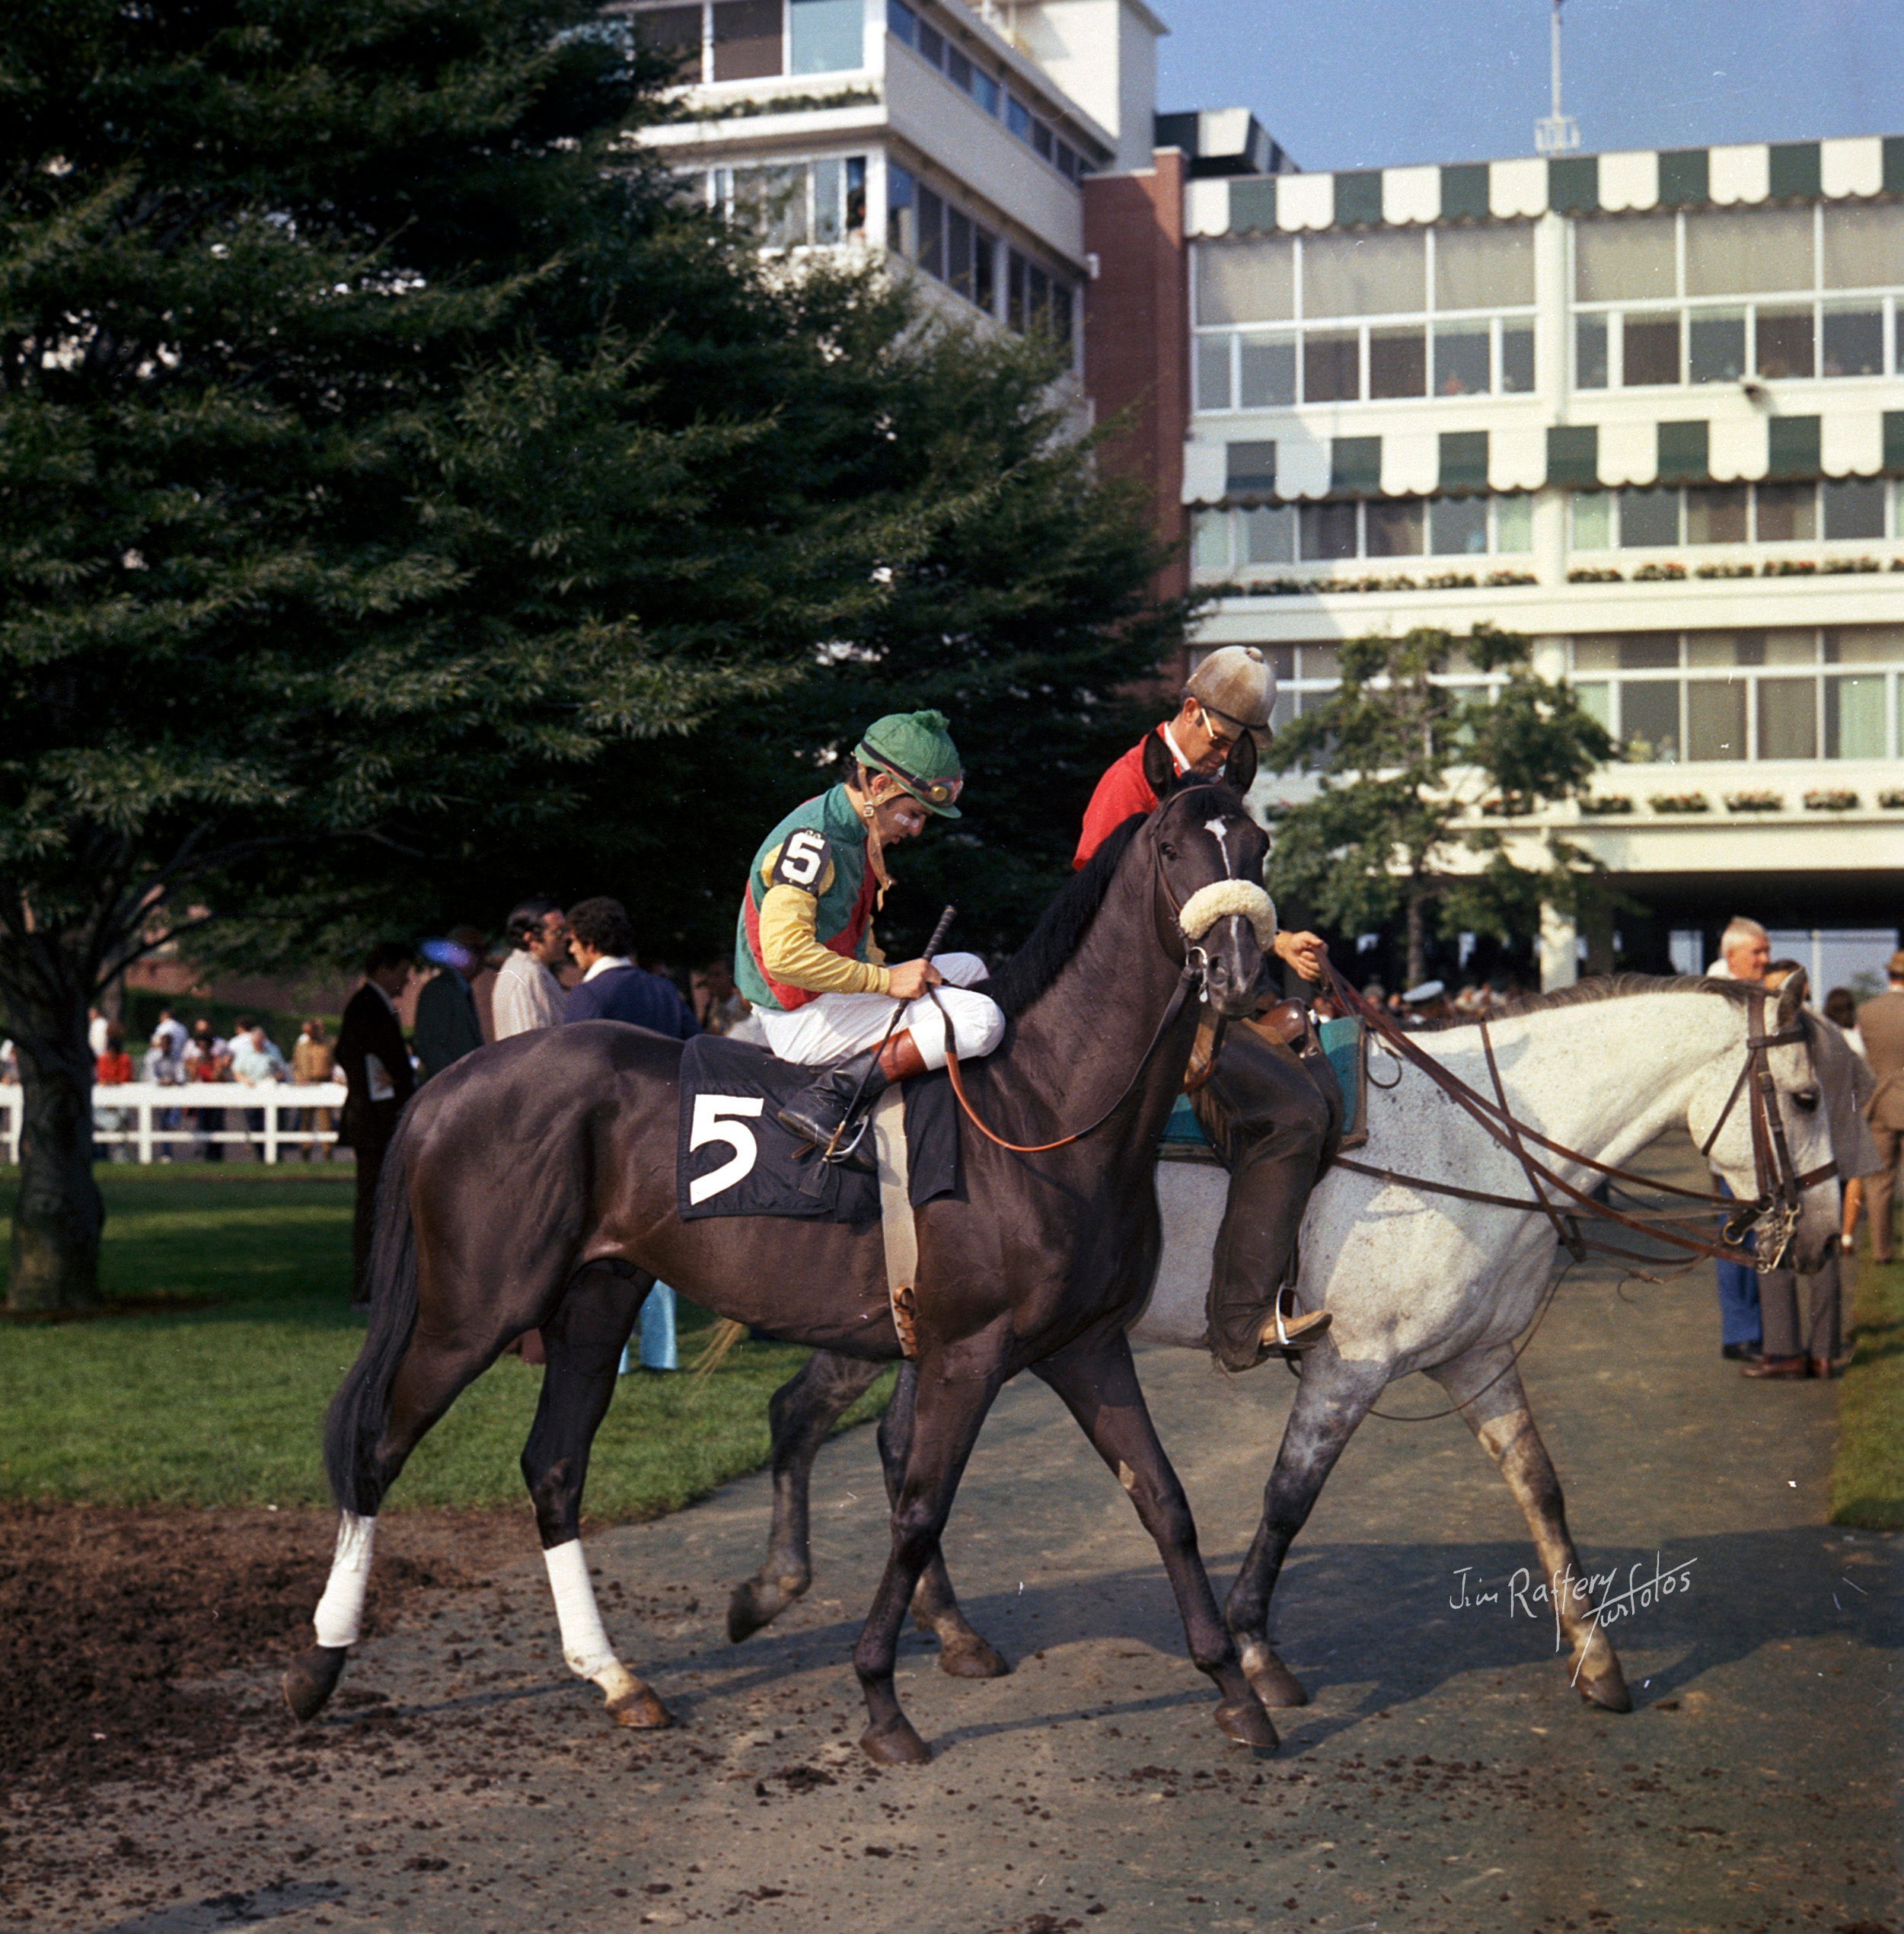 Halo, Vince Bracciale up, at Monmouth Park, July 1, 1972 (Jim Raftery Turfotos)